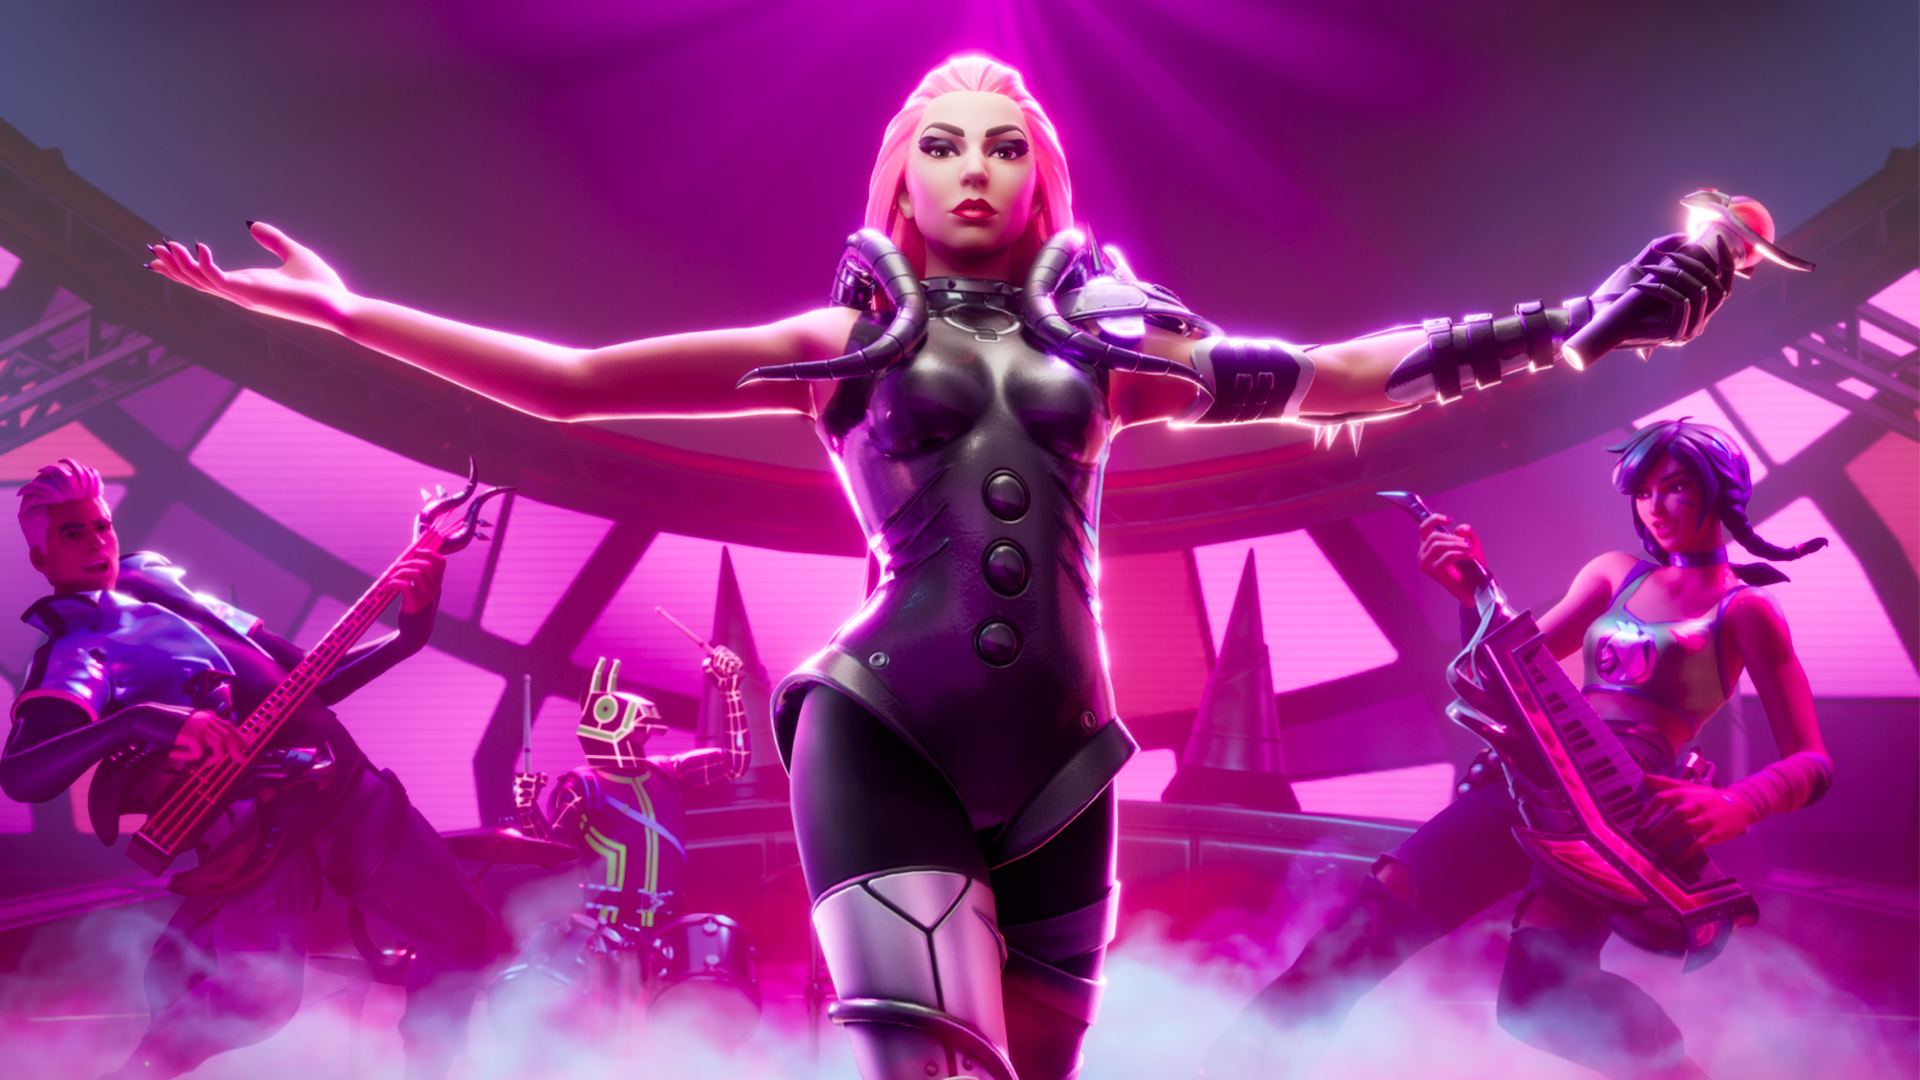 An in-game version of Lady Gaga in Fortnite Festival, flanked by other musicians, on a colorful Chromatica-themed stage